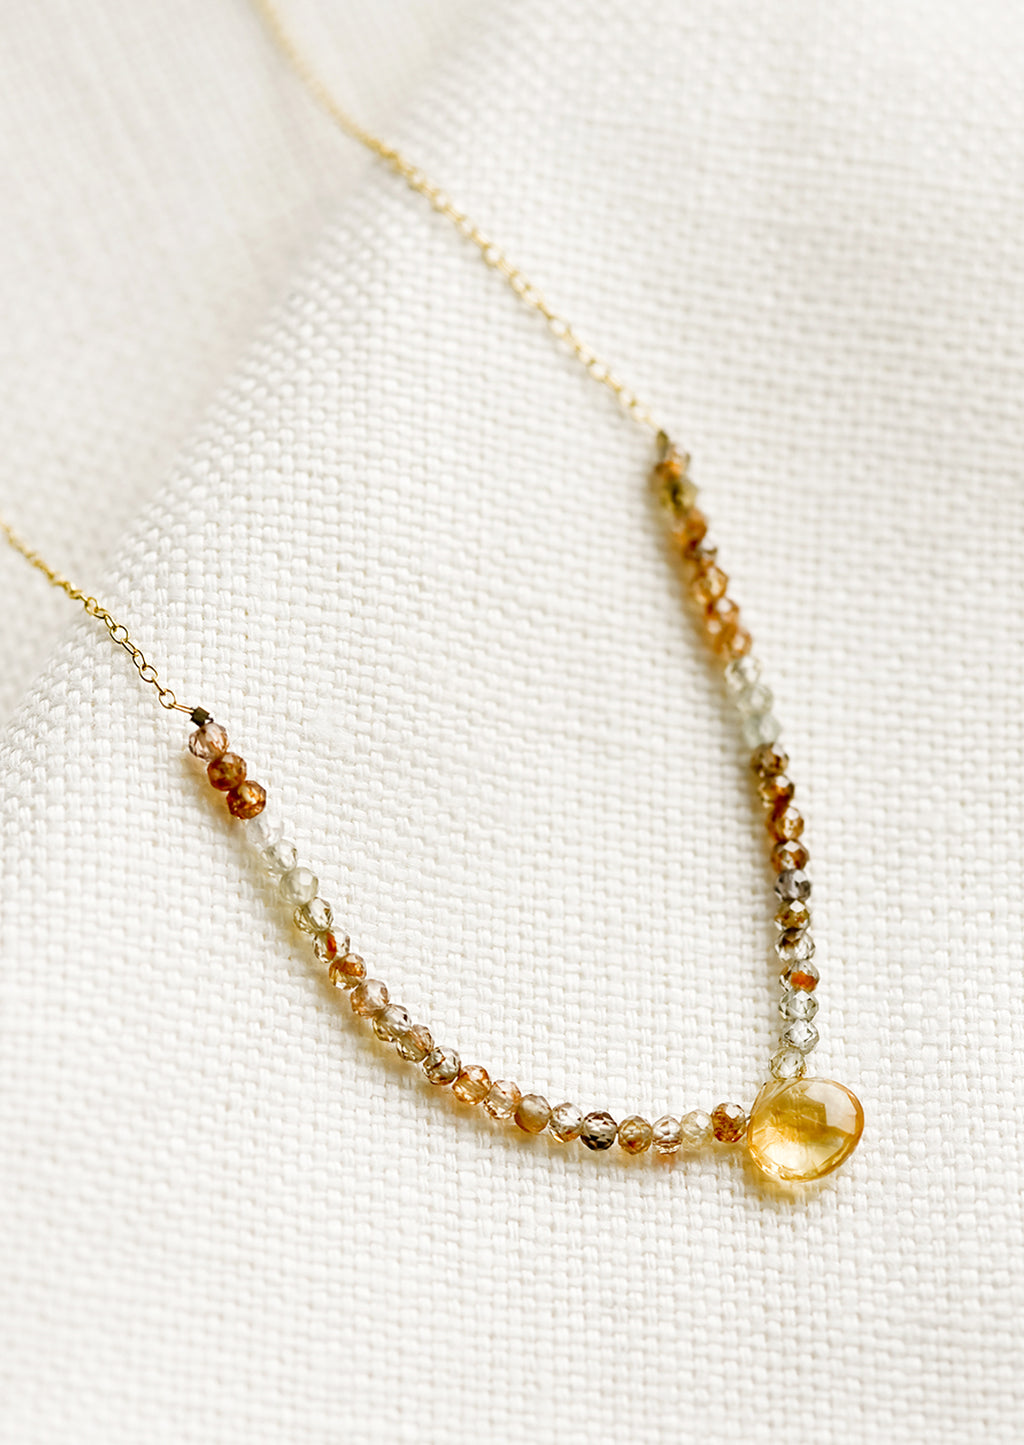 Citrine / Quartz: A beaded necklace with small gemstone beads and citrine teardrop.